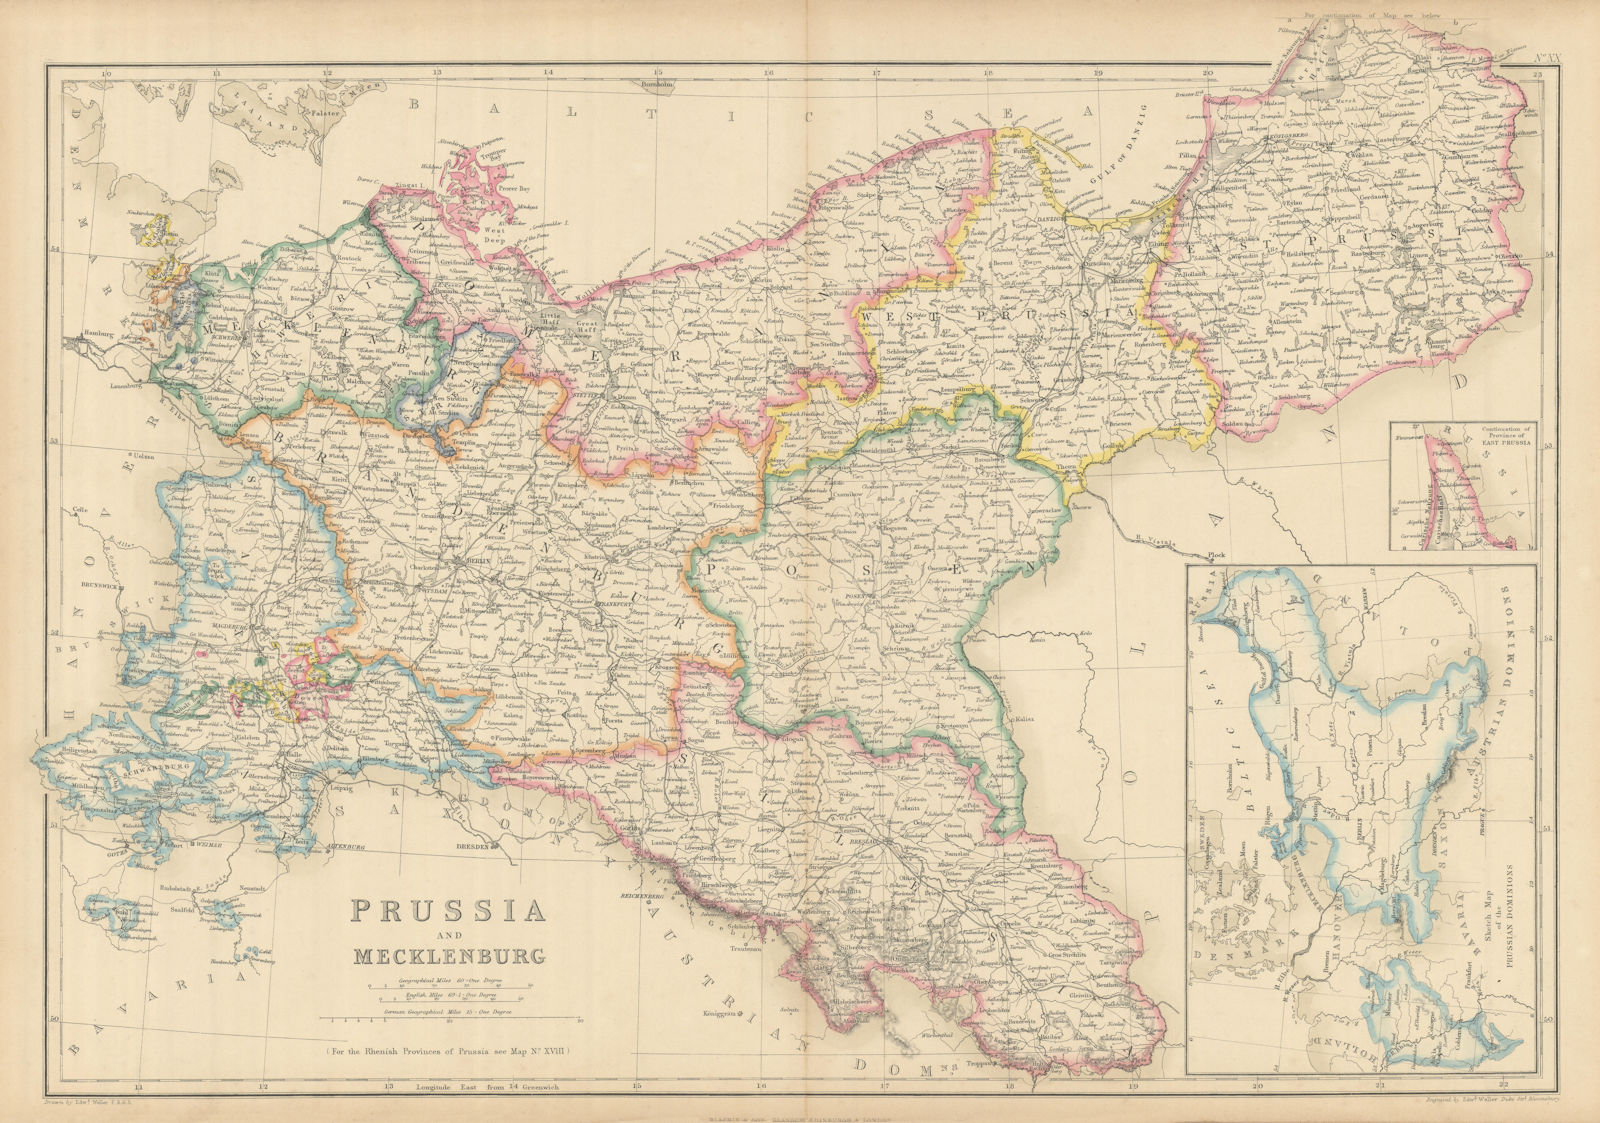 Prussia and Mecklenburg by Edward Weller. Germany & Poland 1860 old map